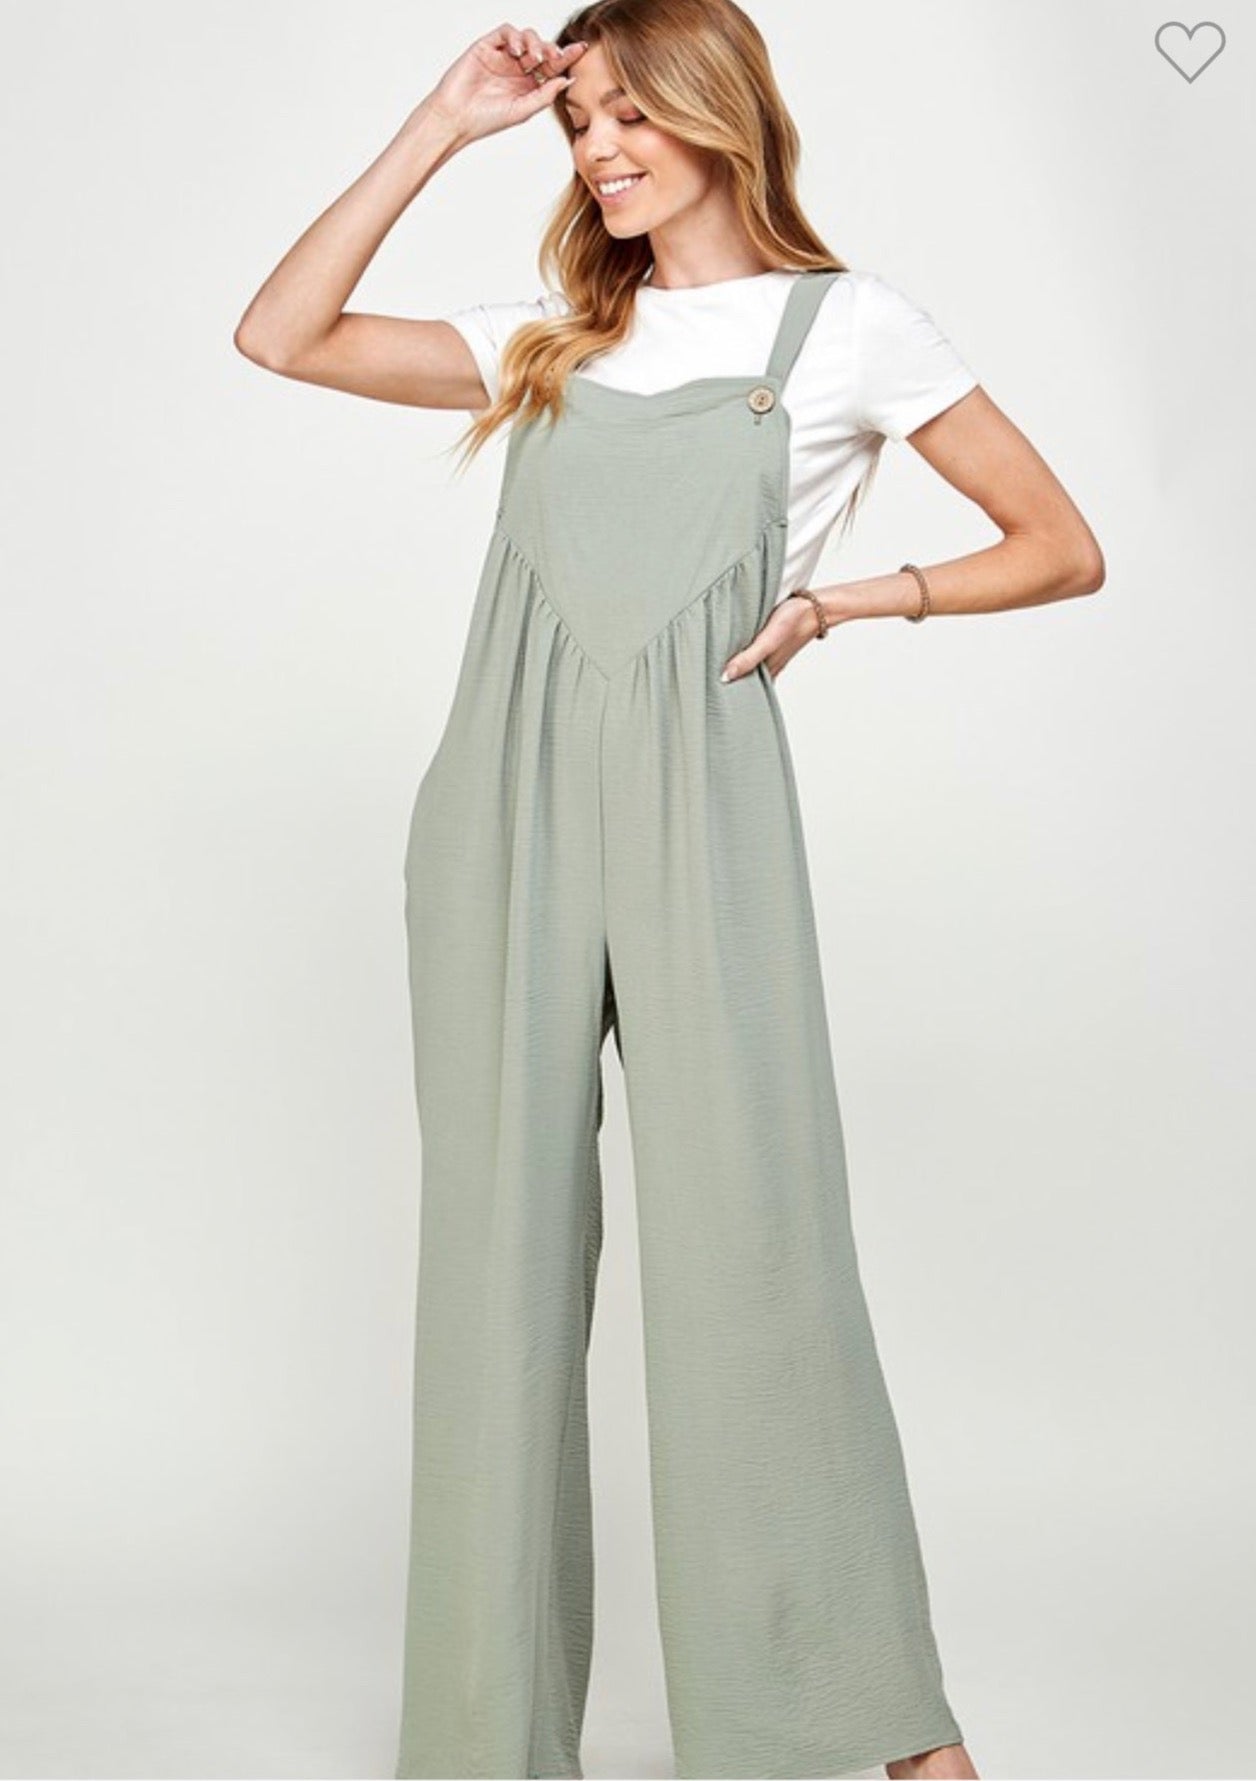 This is the statement piece you have been waiting for! Perfect for traveling, parks with the kids, gardening, and so much more! We can't say enough amazing things about our Sweet Life Wide Leg Overall Jumpsuit! Its linen fabric is lightweight and will keep you cool during the hot sunny days, and the the wide pant legs and deep pockets not only make you stylish but functional! You won't want to miss out on our Sweet Life Square Neck Wide Leg Linen Jumpsuit!